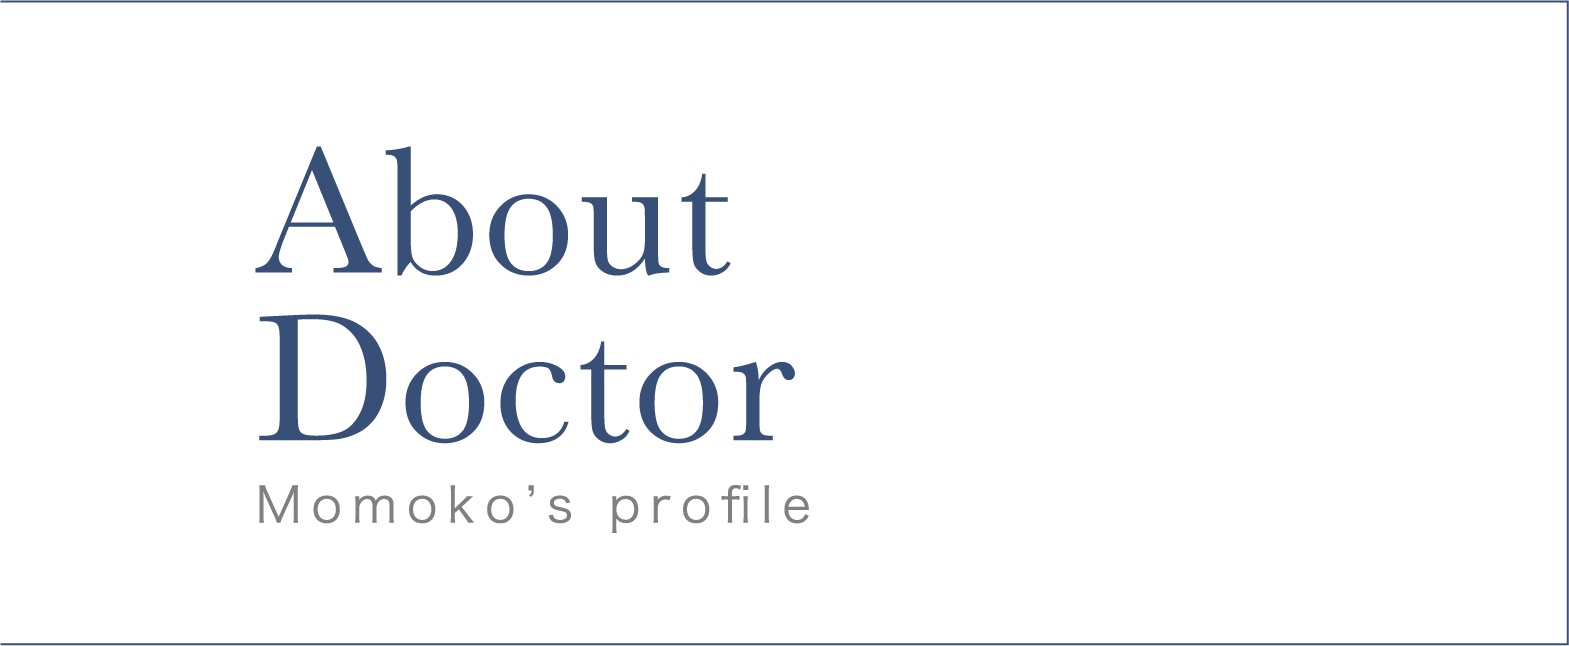 About Doctor